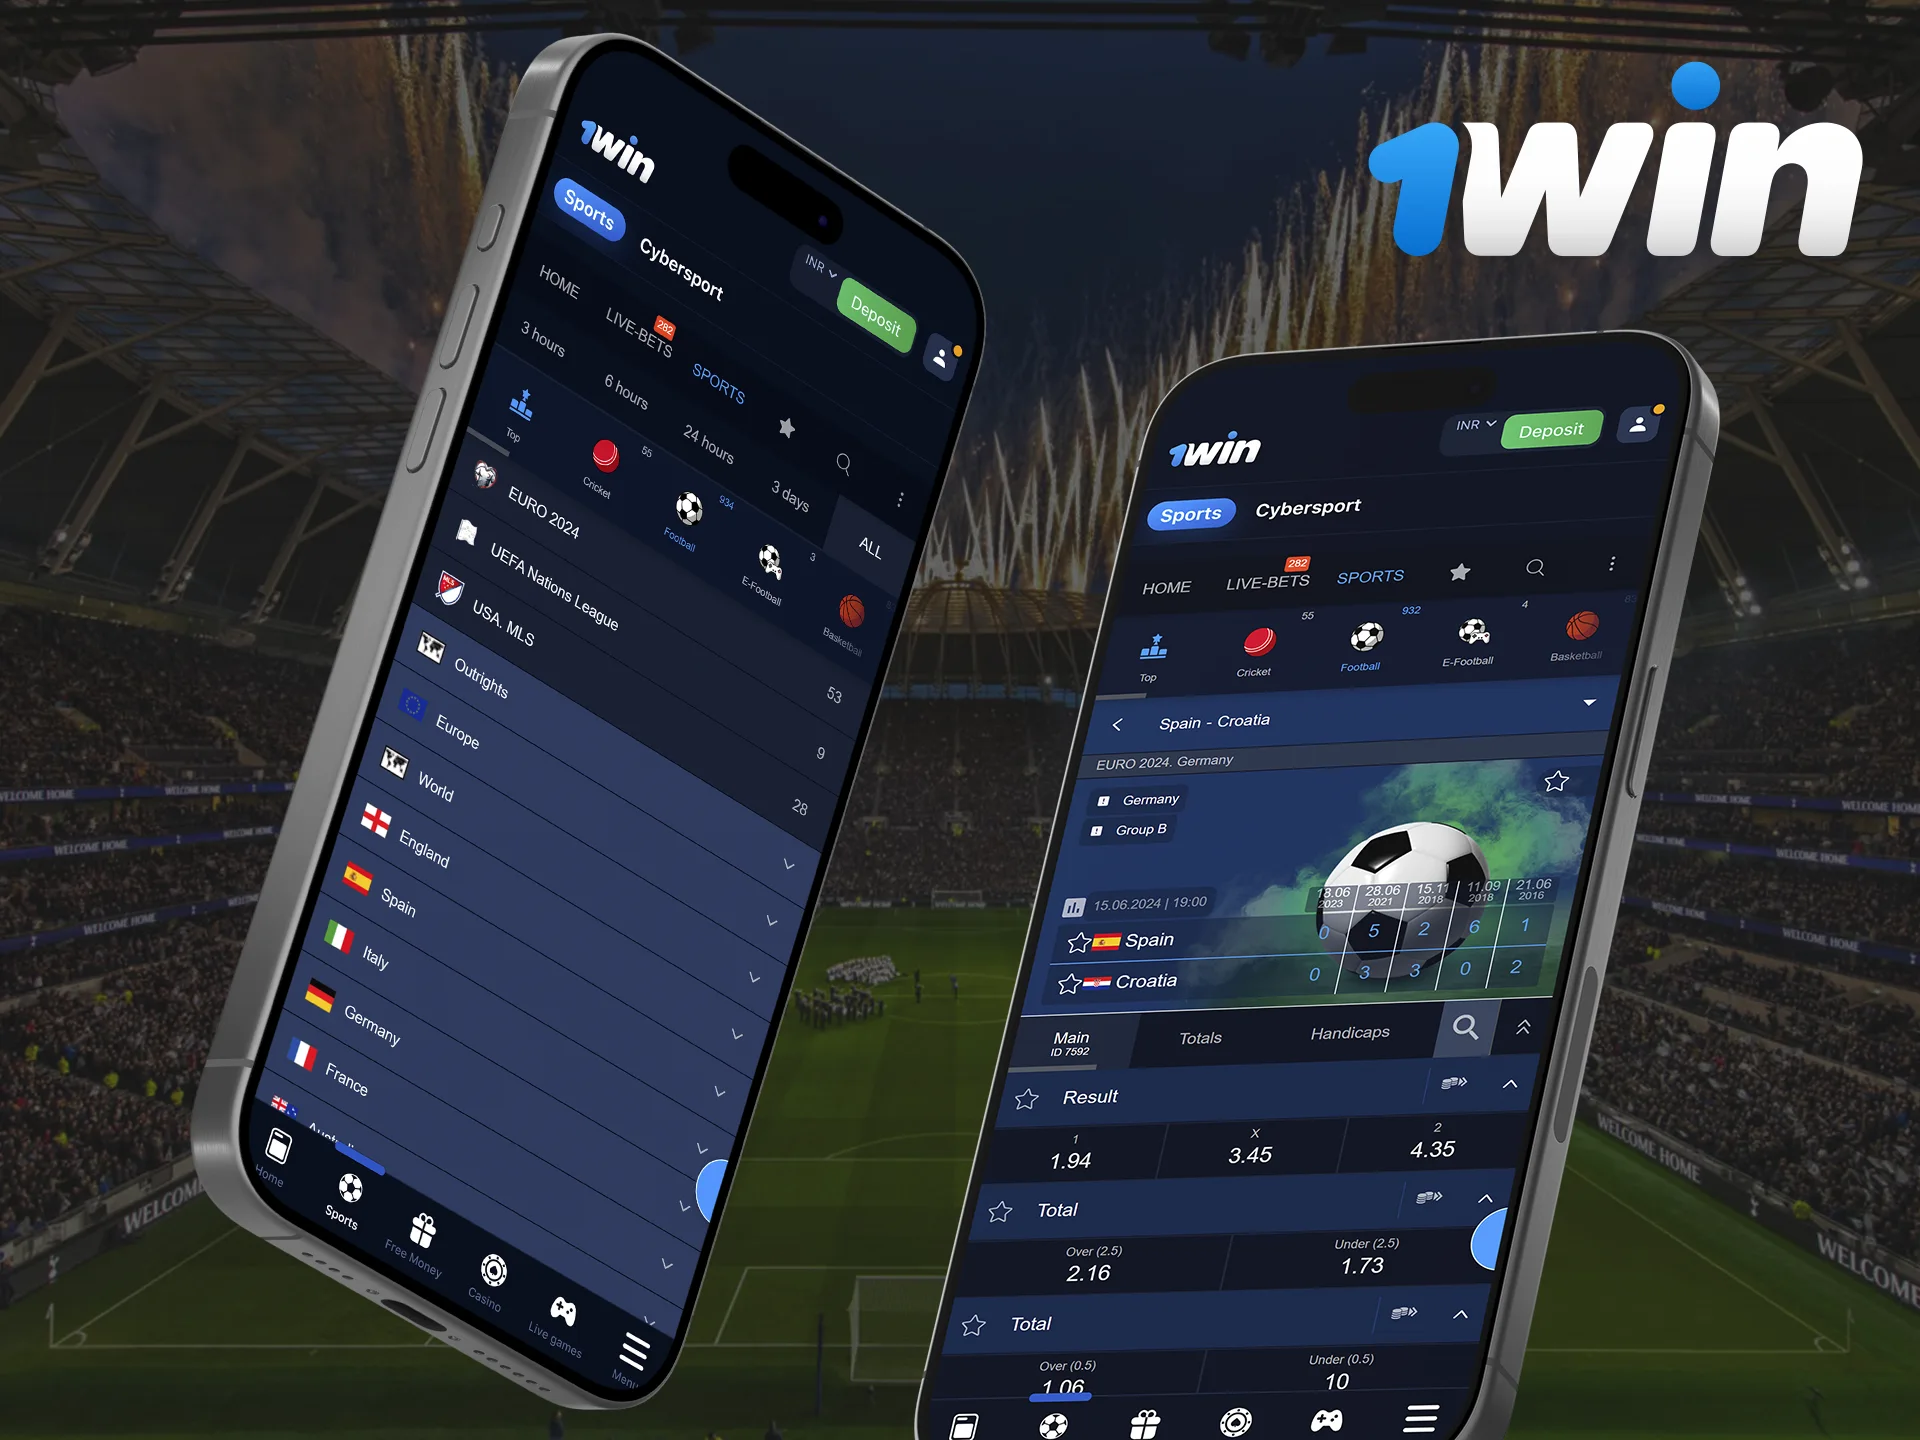 Download the 1Win app and enjoy betting on various football events.